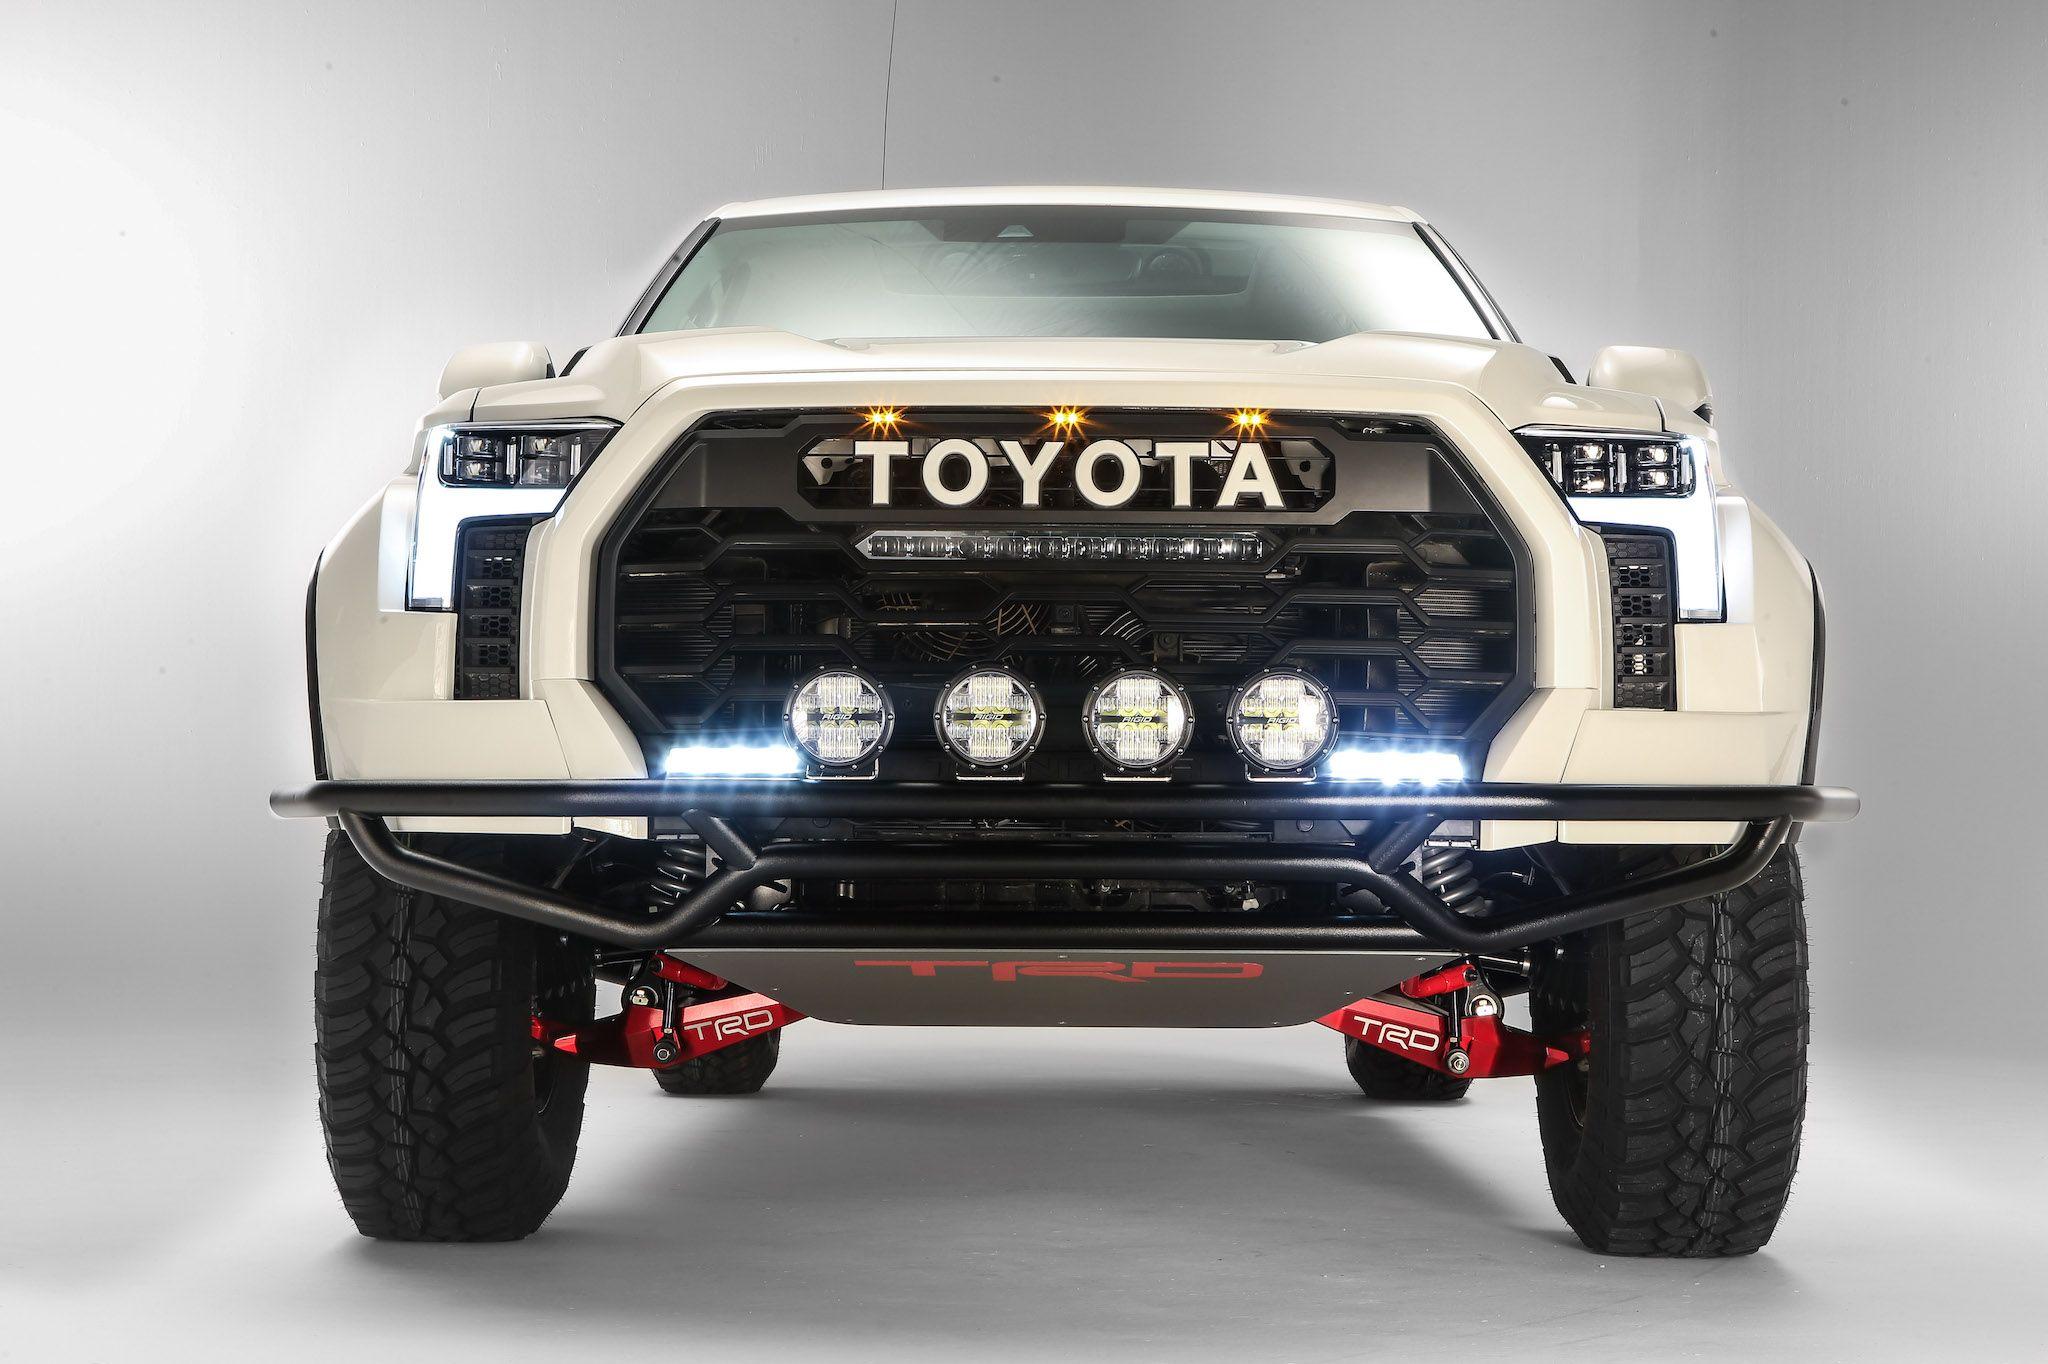 Toyota Trd Desert Racer Tundra May Pre A Raptor Fighter